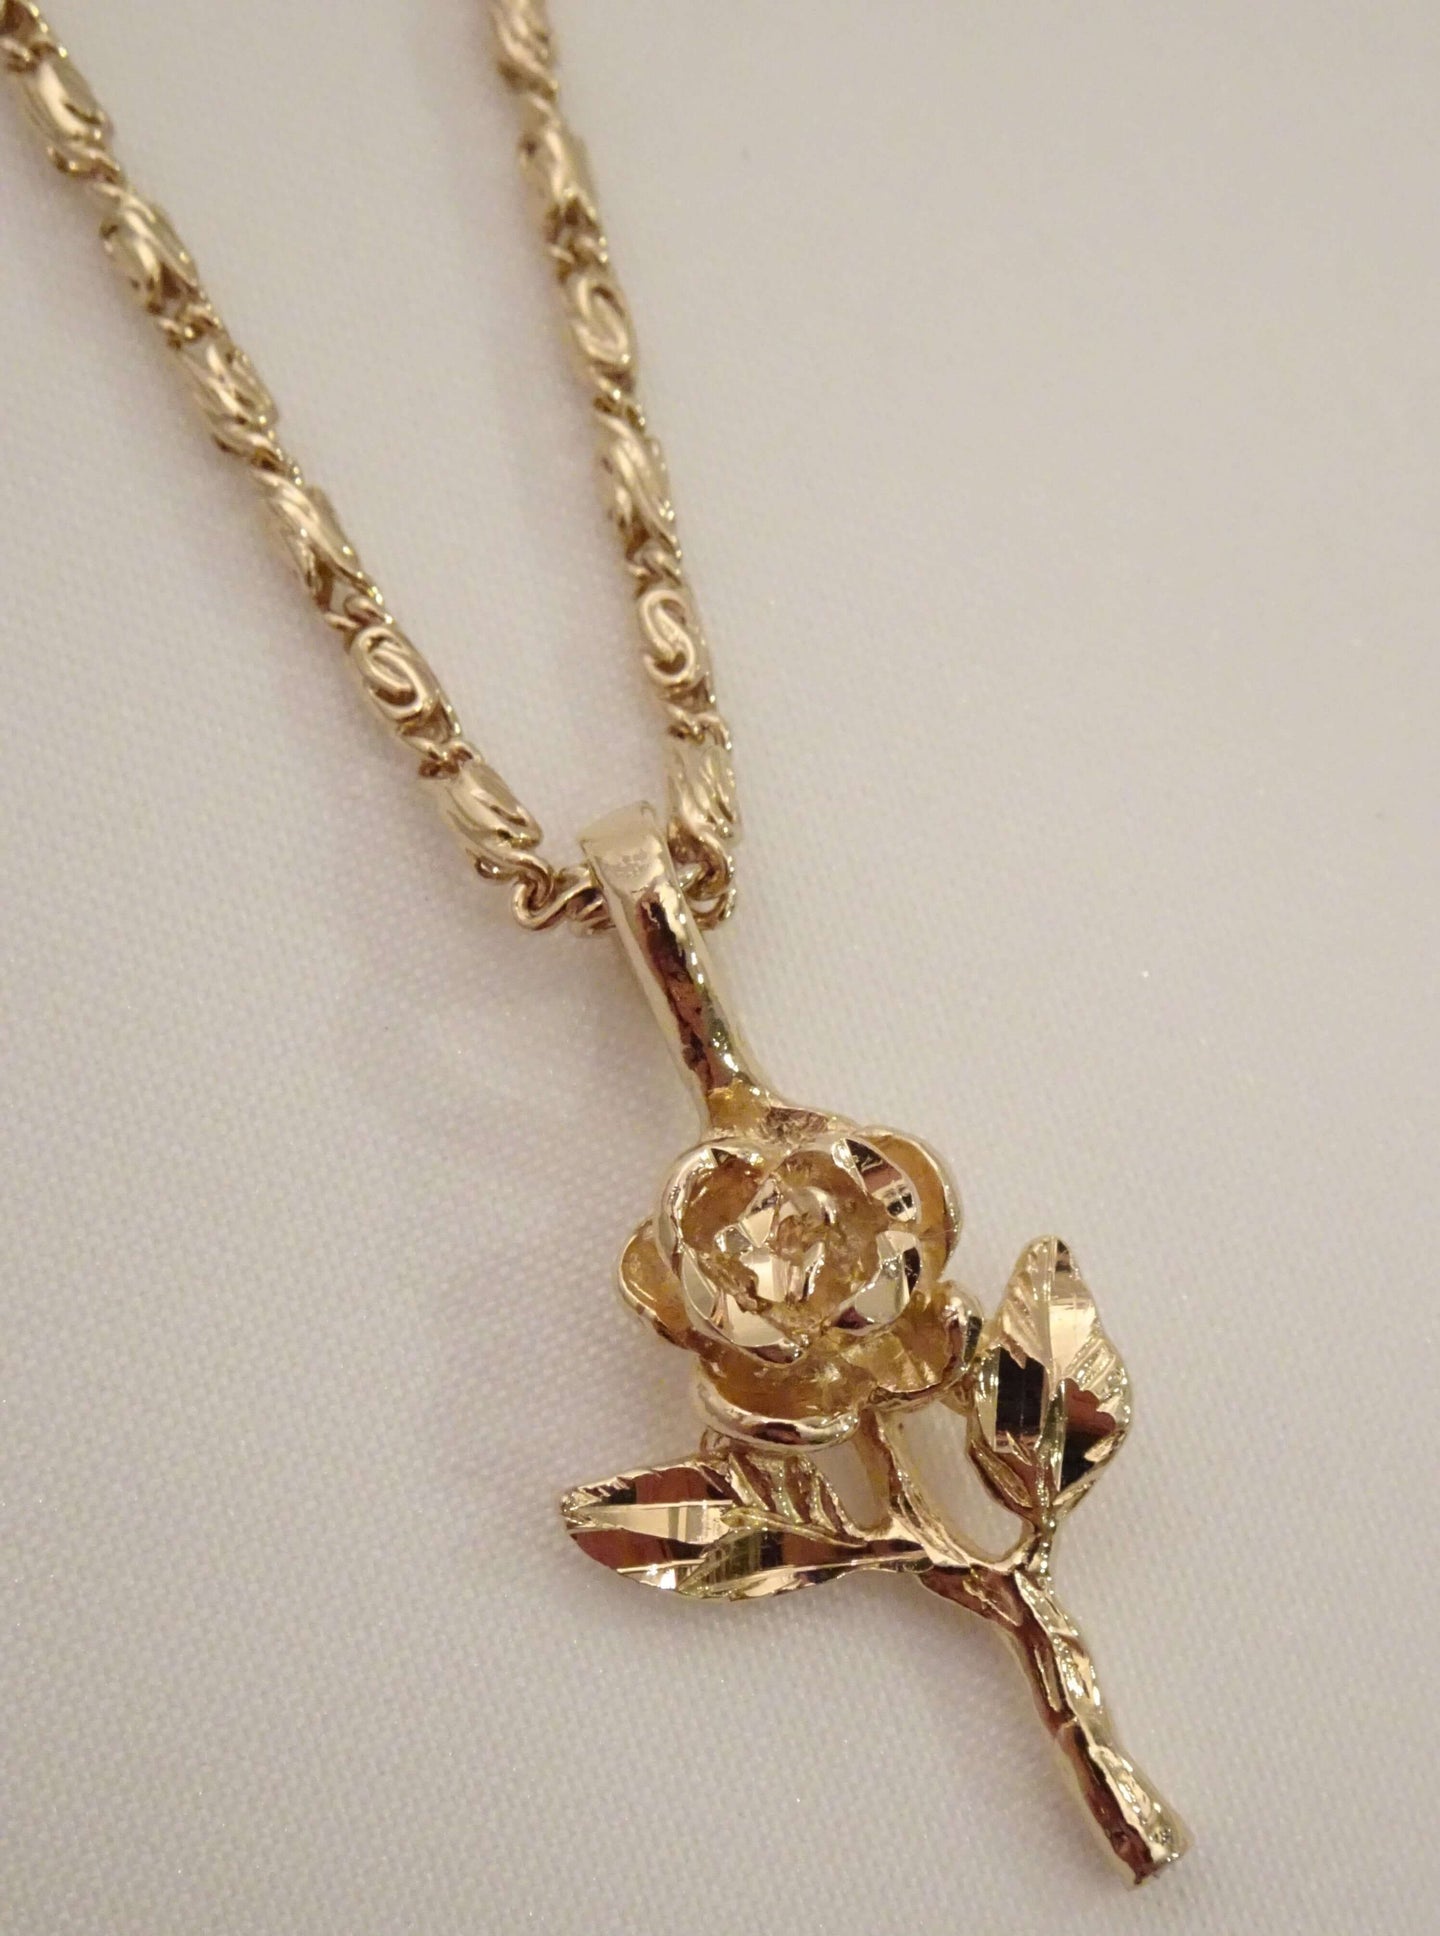 Dangling Good Luck Charms Necklace in 14K Tricolor Gold | GoldenMine.com